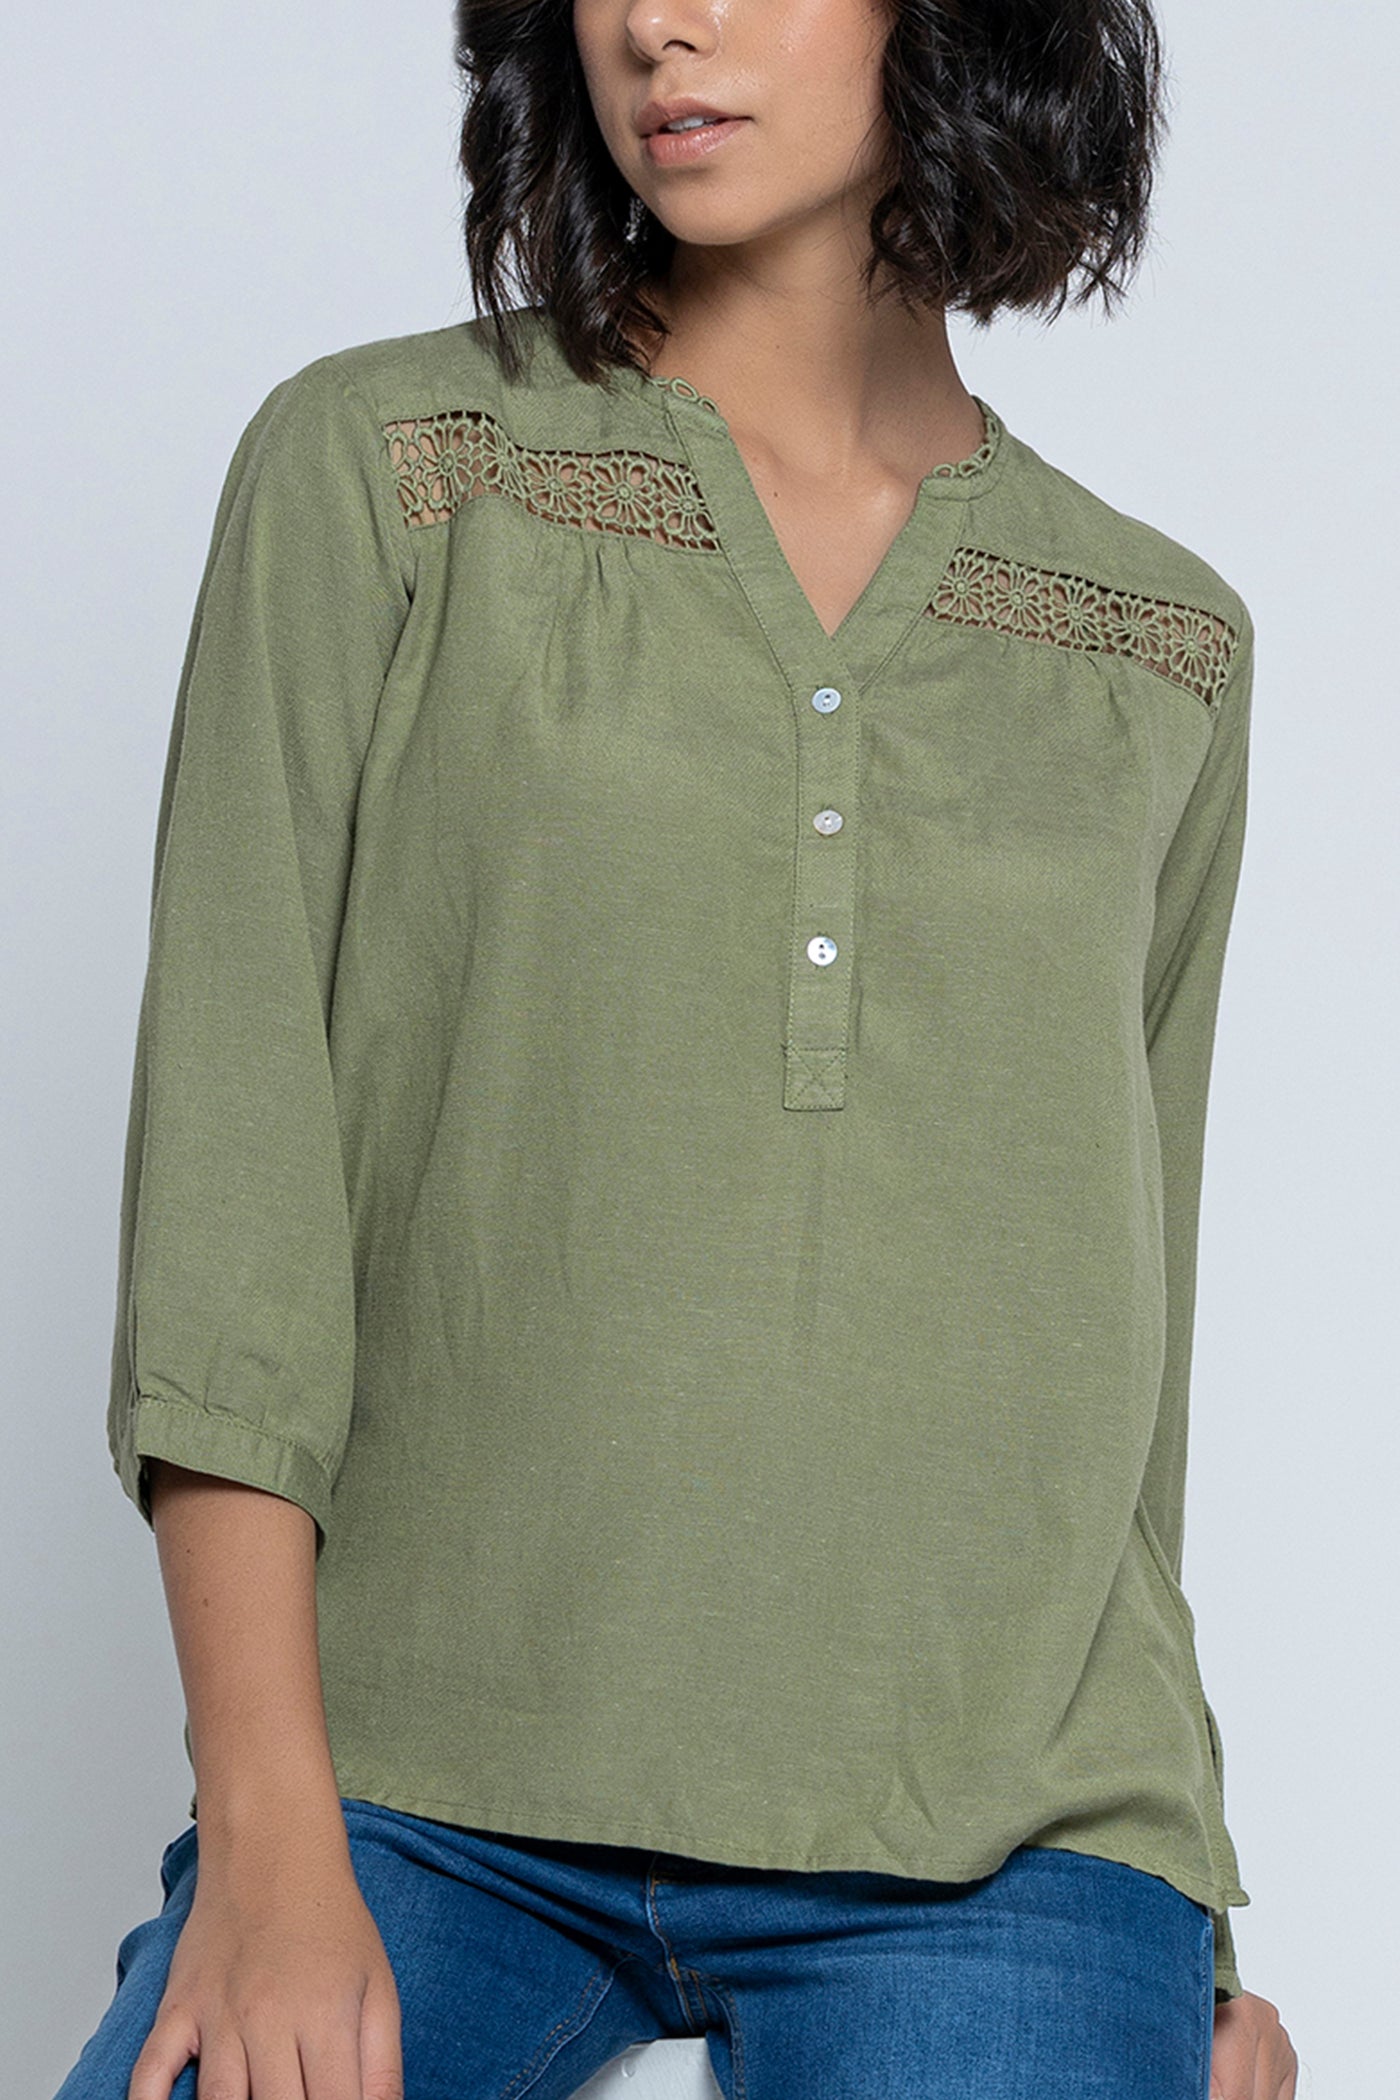 Olive Green 3/4 Sleeves Blouse